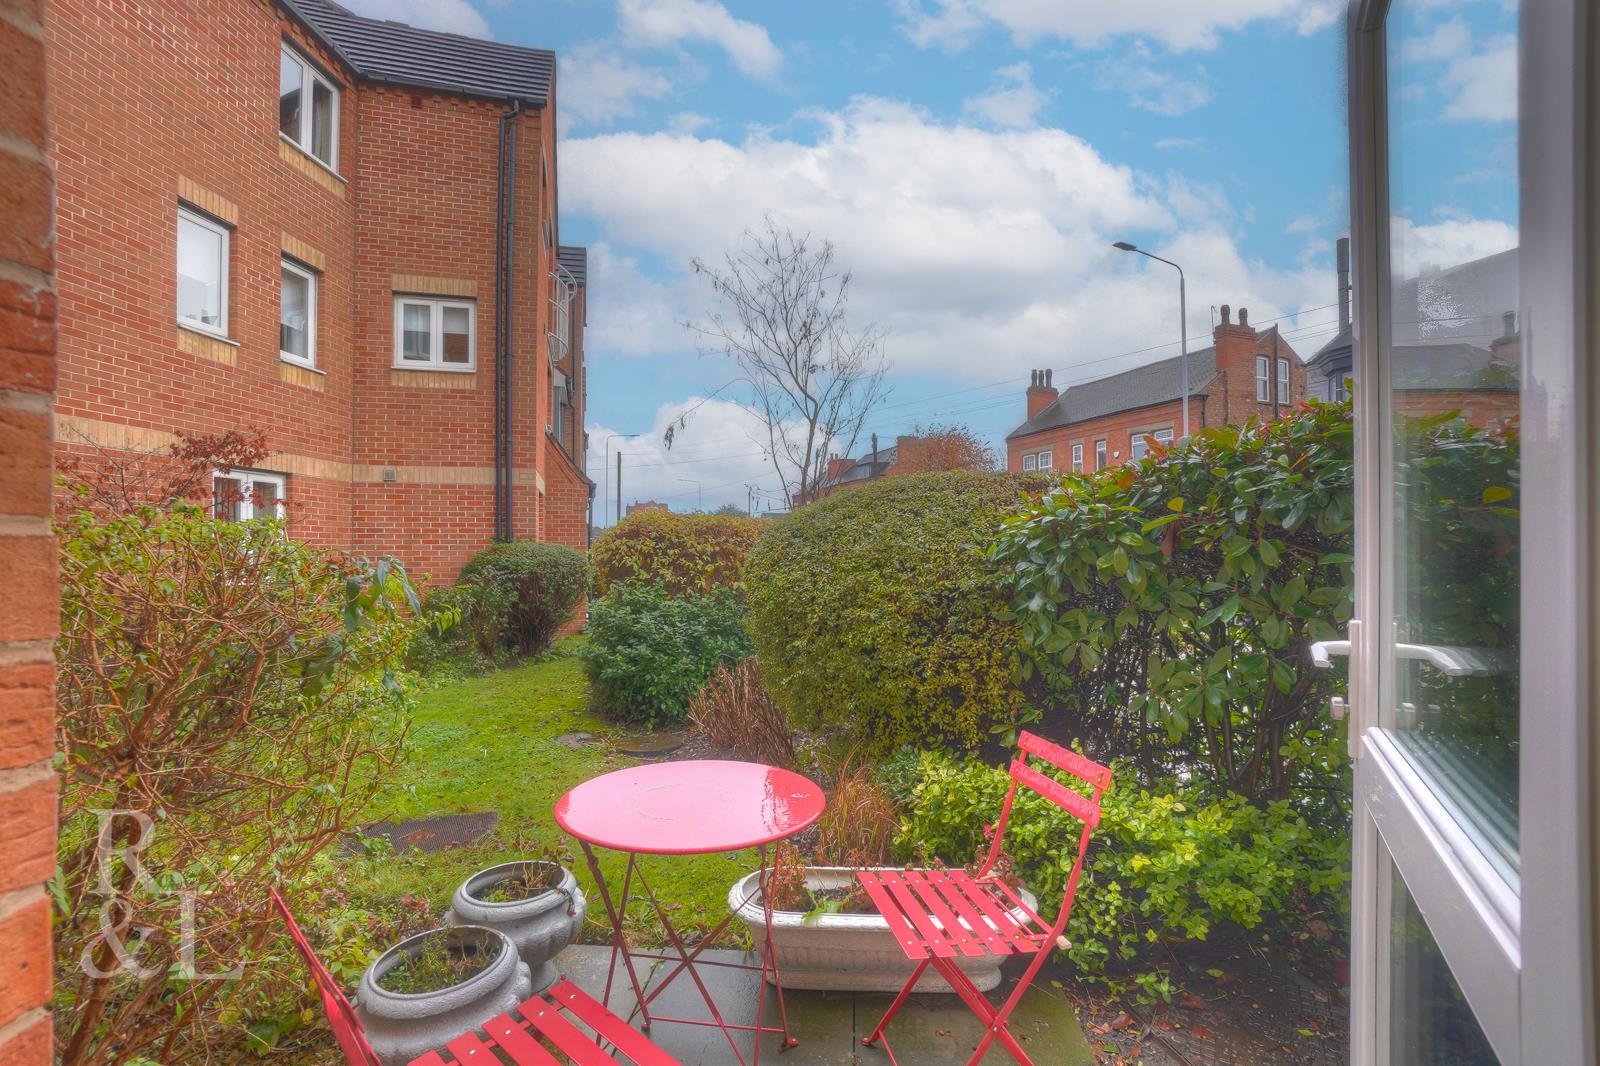 Property image for Giles Court, Rectory Road, West Bridgford, Nottingham